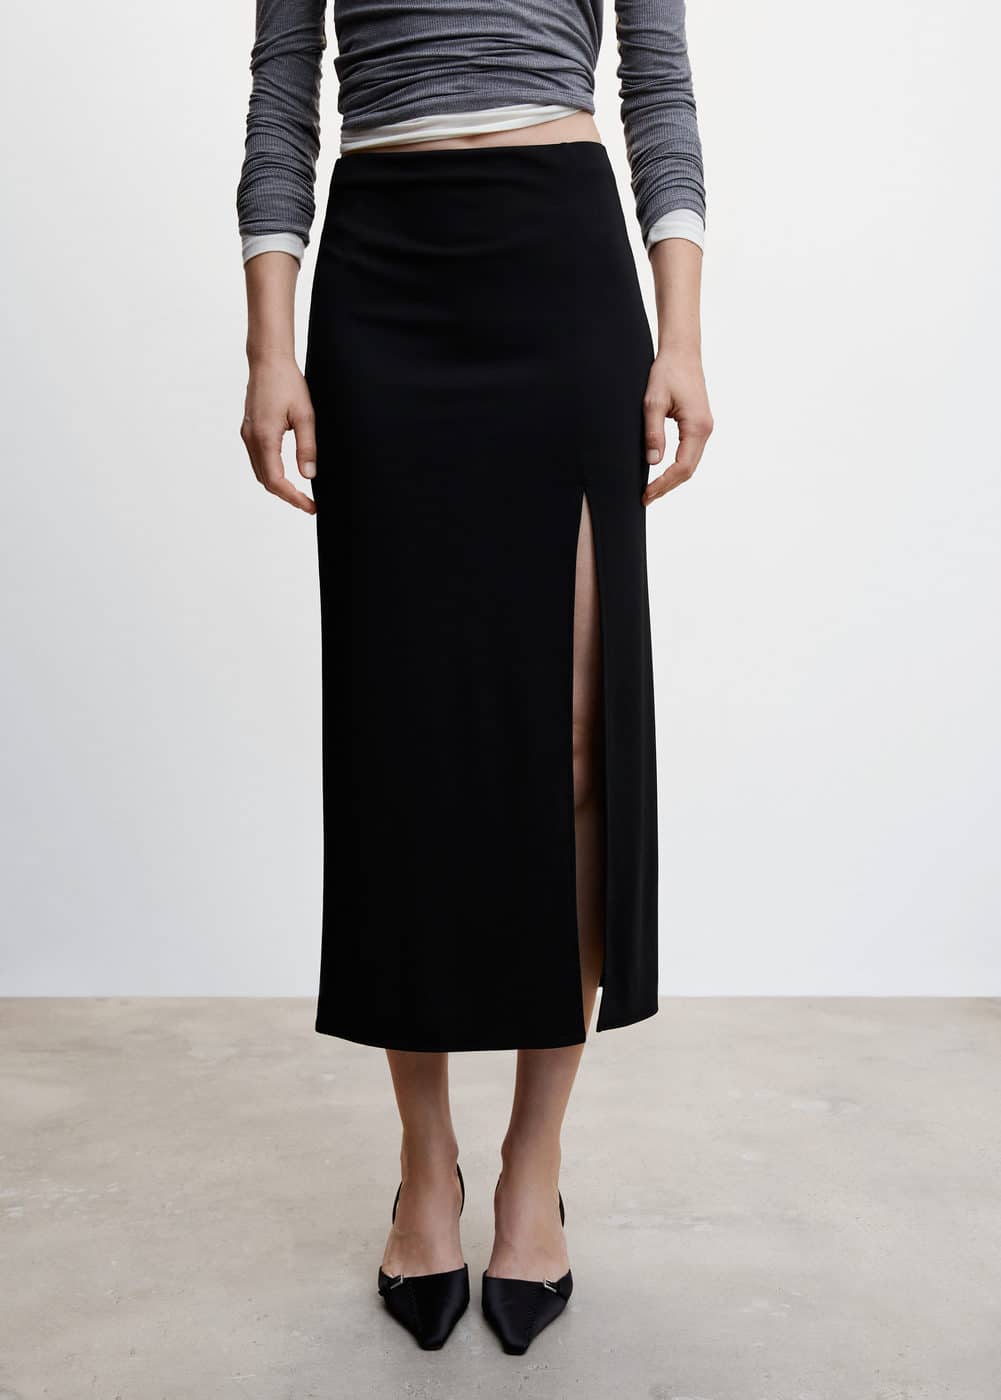 8 Ways I'll Be Wearing Maxi Skirts on Repeat in 2023 | Who What Wear